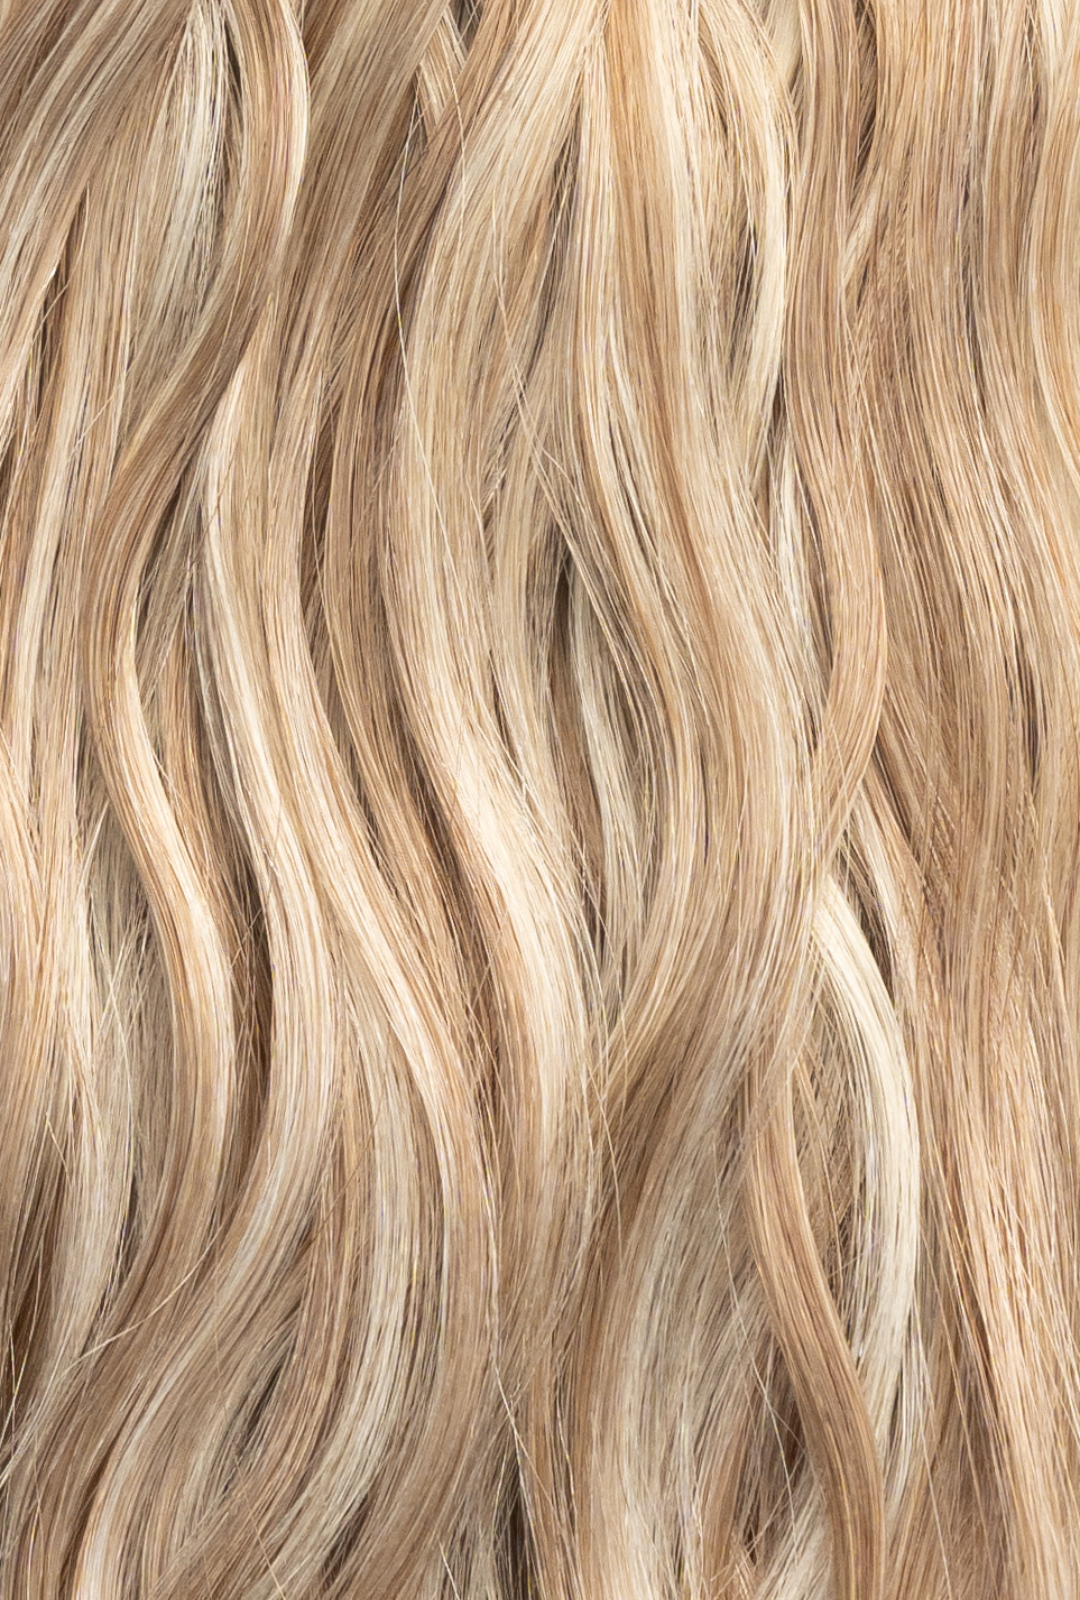 Waved by Laced Hair Machine Sewn Weft Extensions Dimensional #8/60